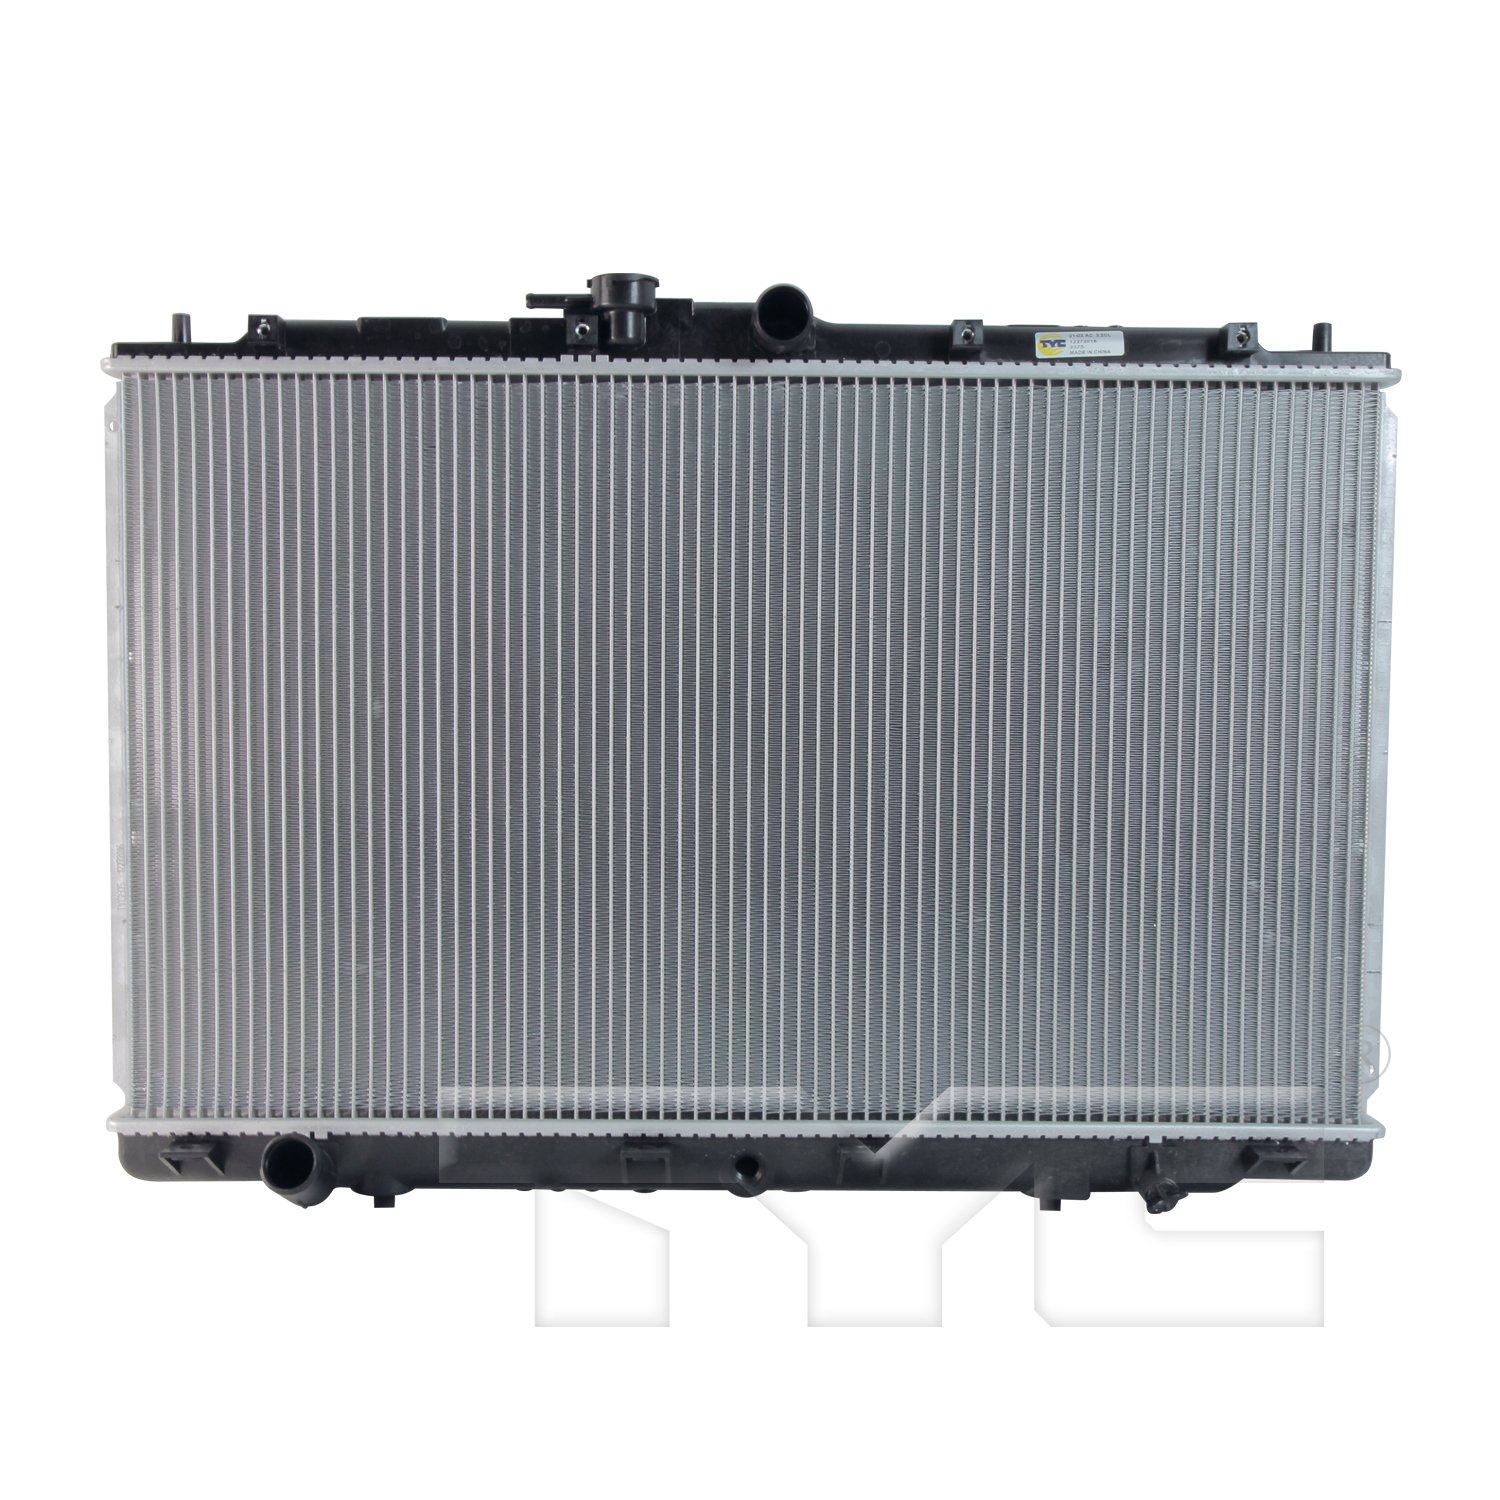 Aftermarket RADIATORS for ACURA - CL, CL,01-03,Radiator assembly